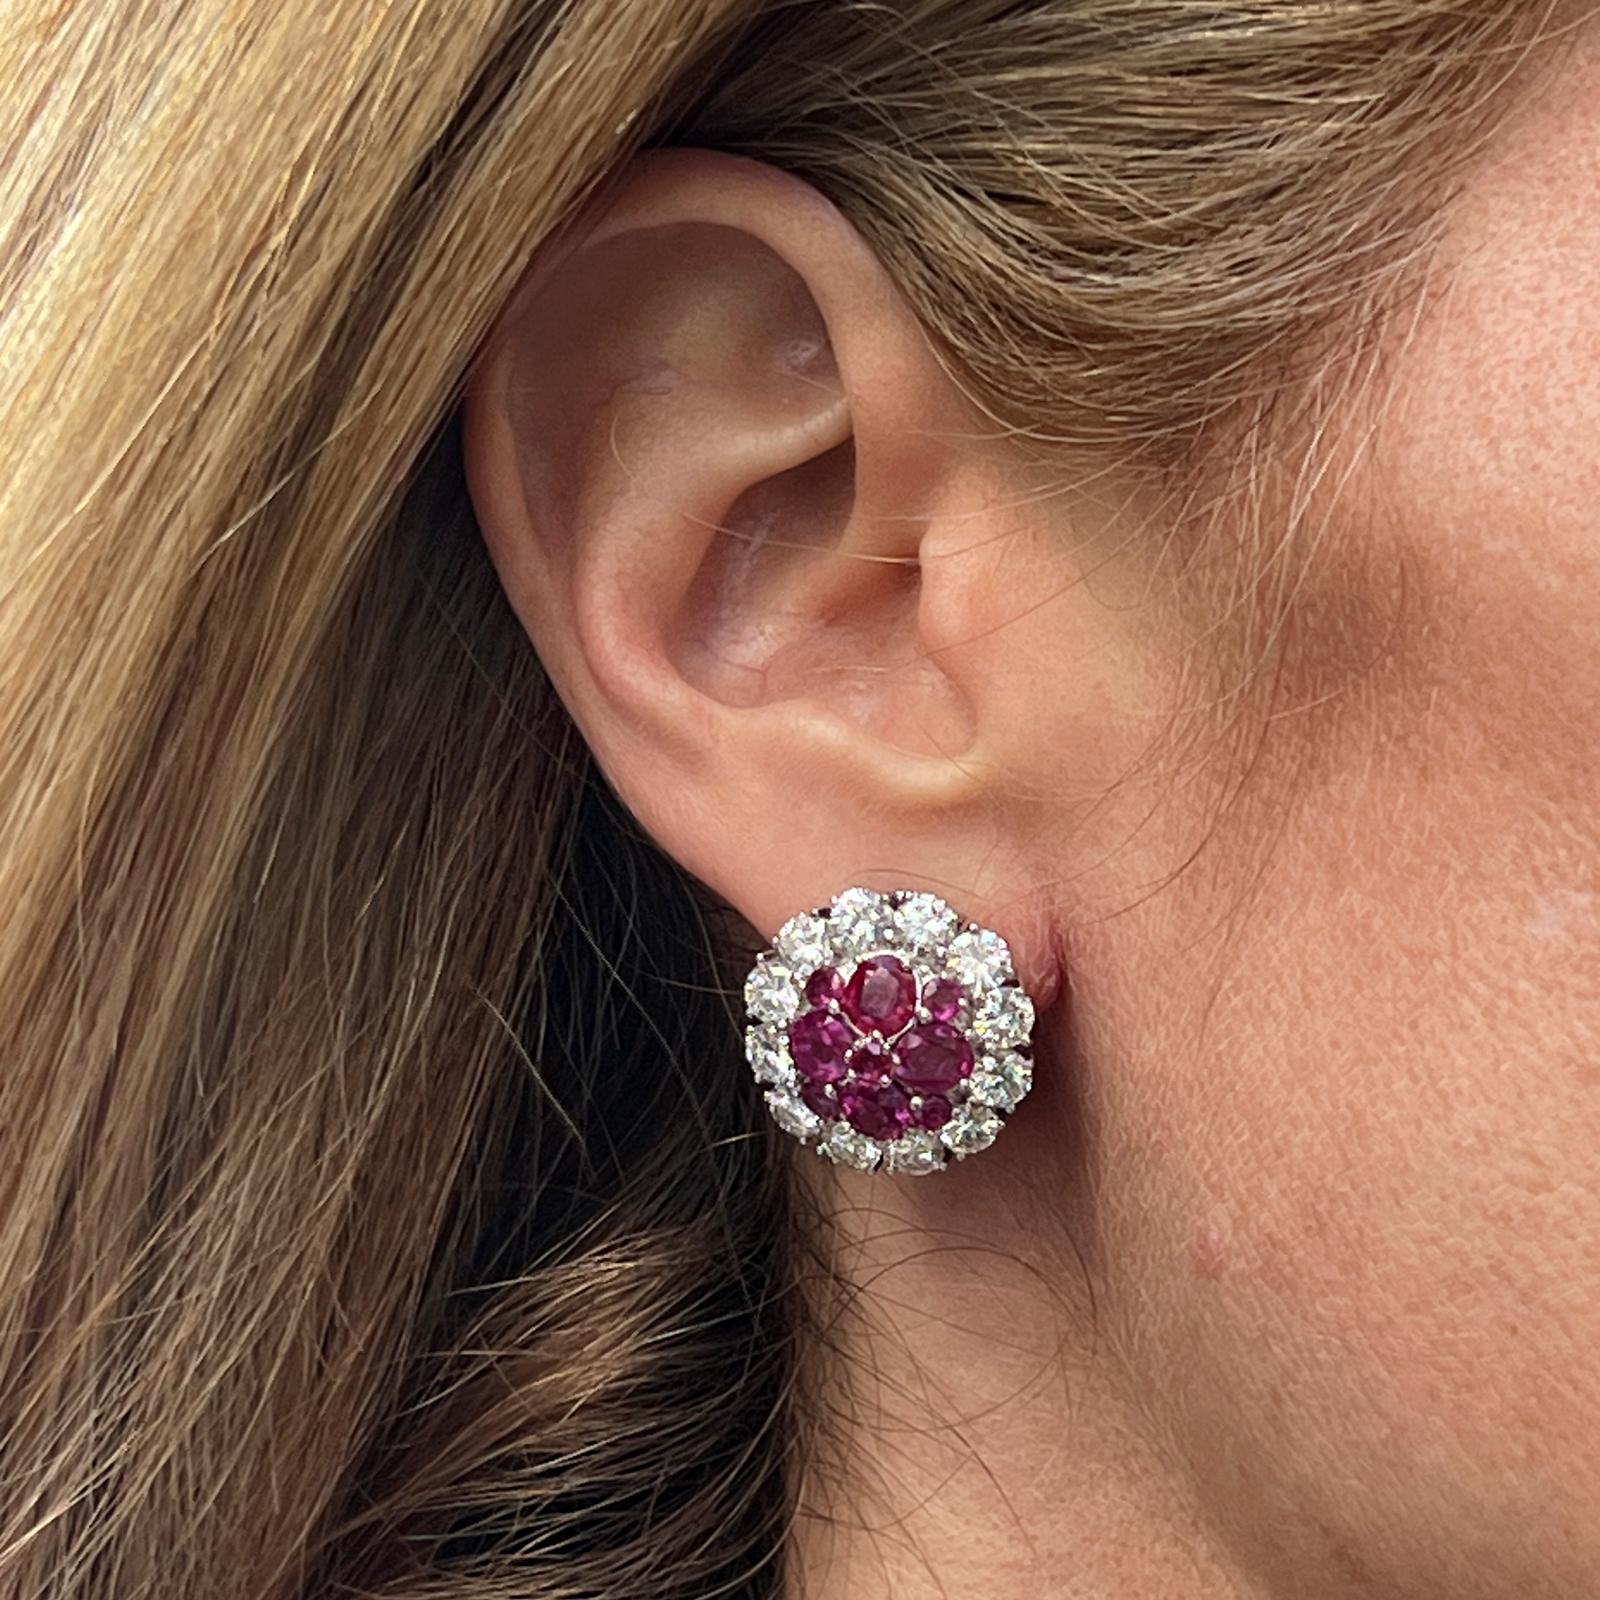 Spectacular diamond and ruby circle earrings crafted in 18 karat white gold. The earrings feature 24 round brilliant cut diamonds weighing approximatley 6.00 carat total weight and graded F-G color and VS clarity. The 18 red round natural rubies